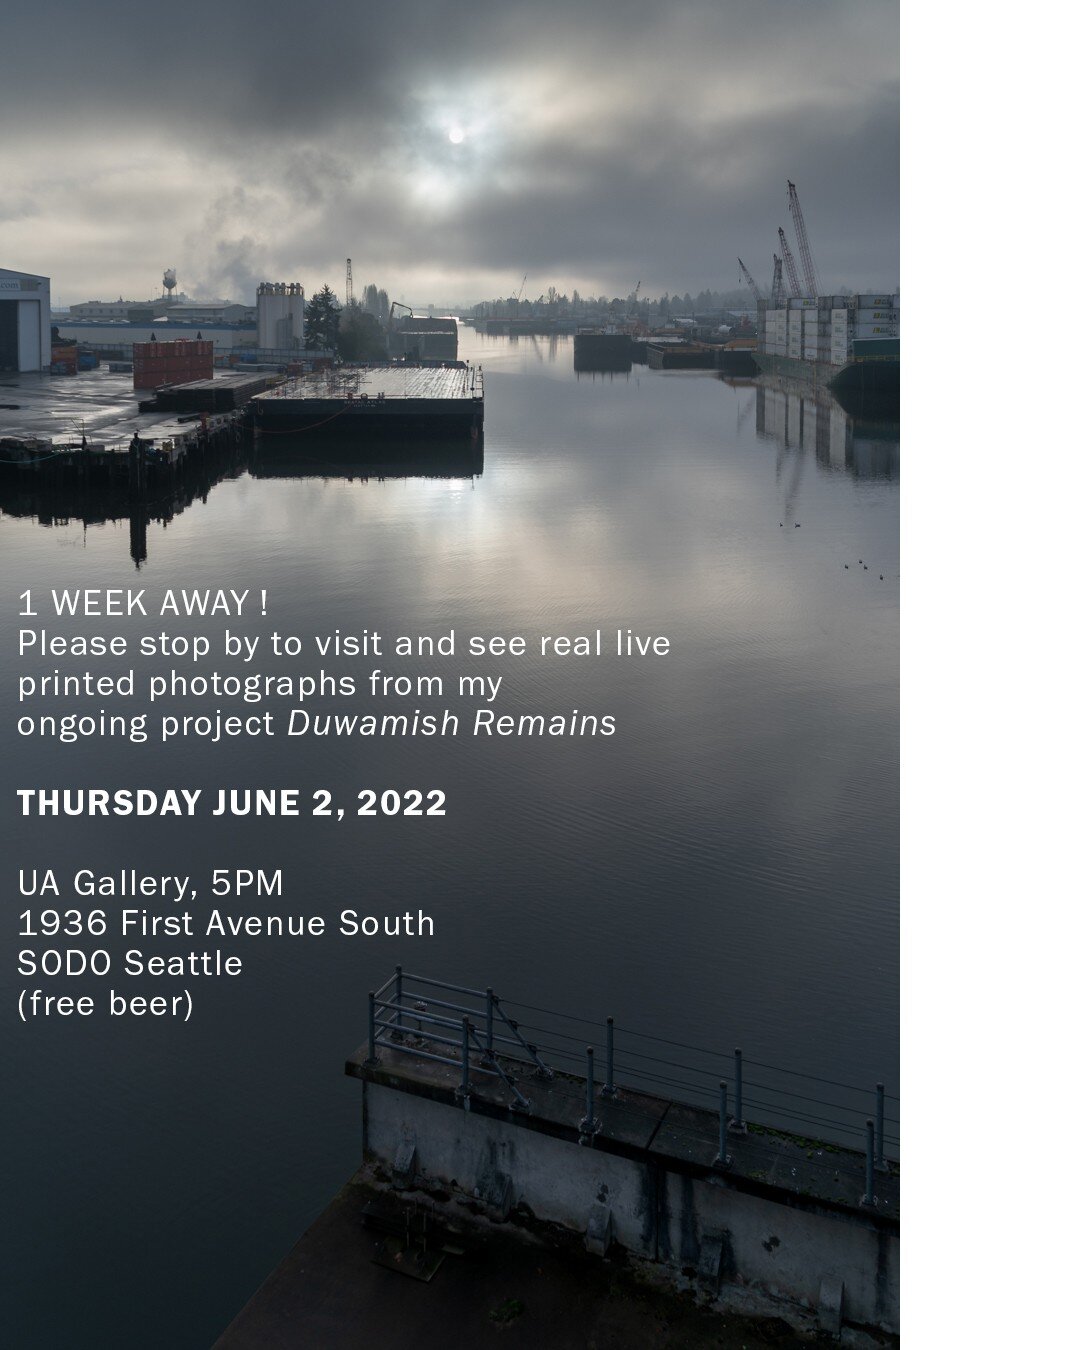 Duwamish Remains
UA Gallery
Thursday June 2, 2022
1936 First Ave South, SODO, Seattle
.
@duwamishremains @urbanadd_architects #duwamishremains #duwamishriver #duwamishterritory #duwamishwatershed #duwamish #duwamishmeanders #duwamishwaterway #riverfo